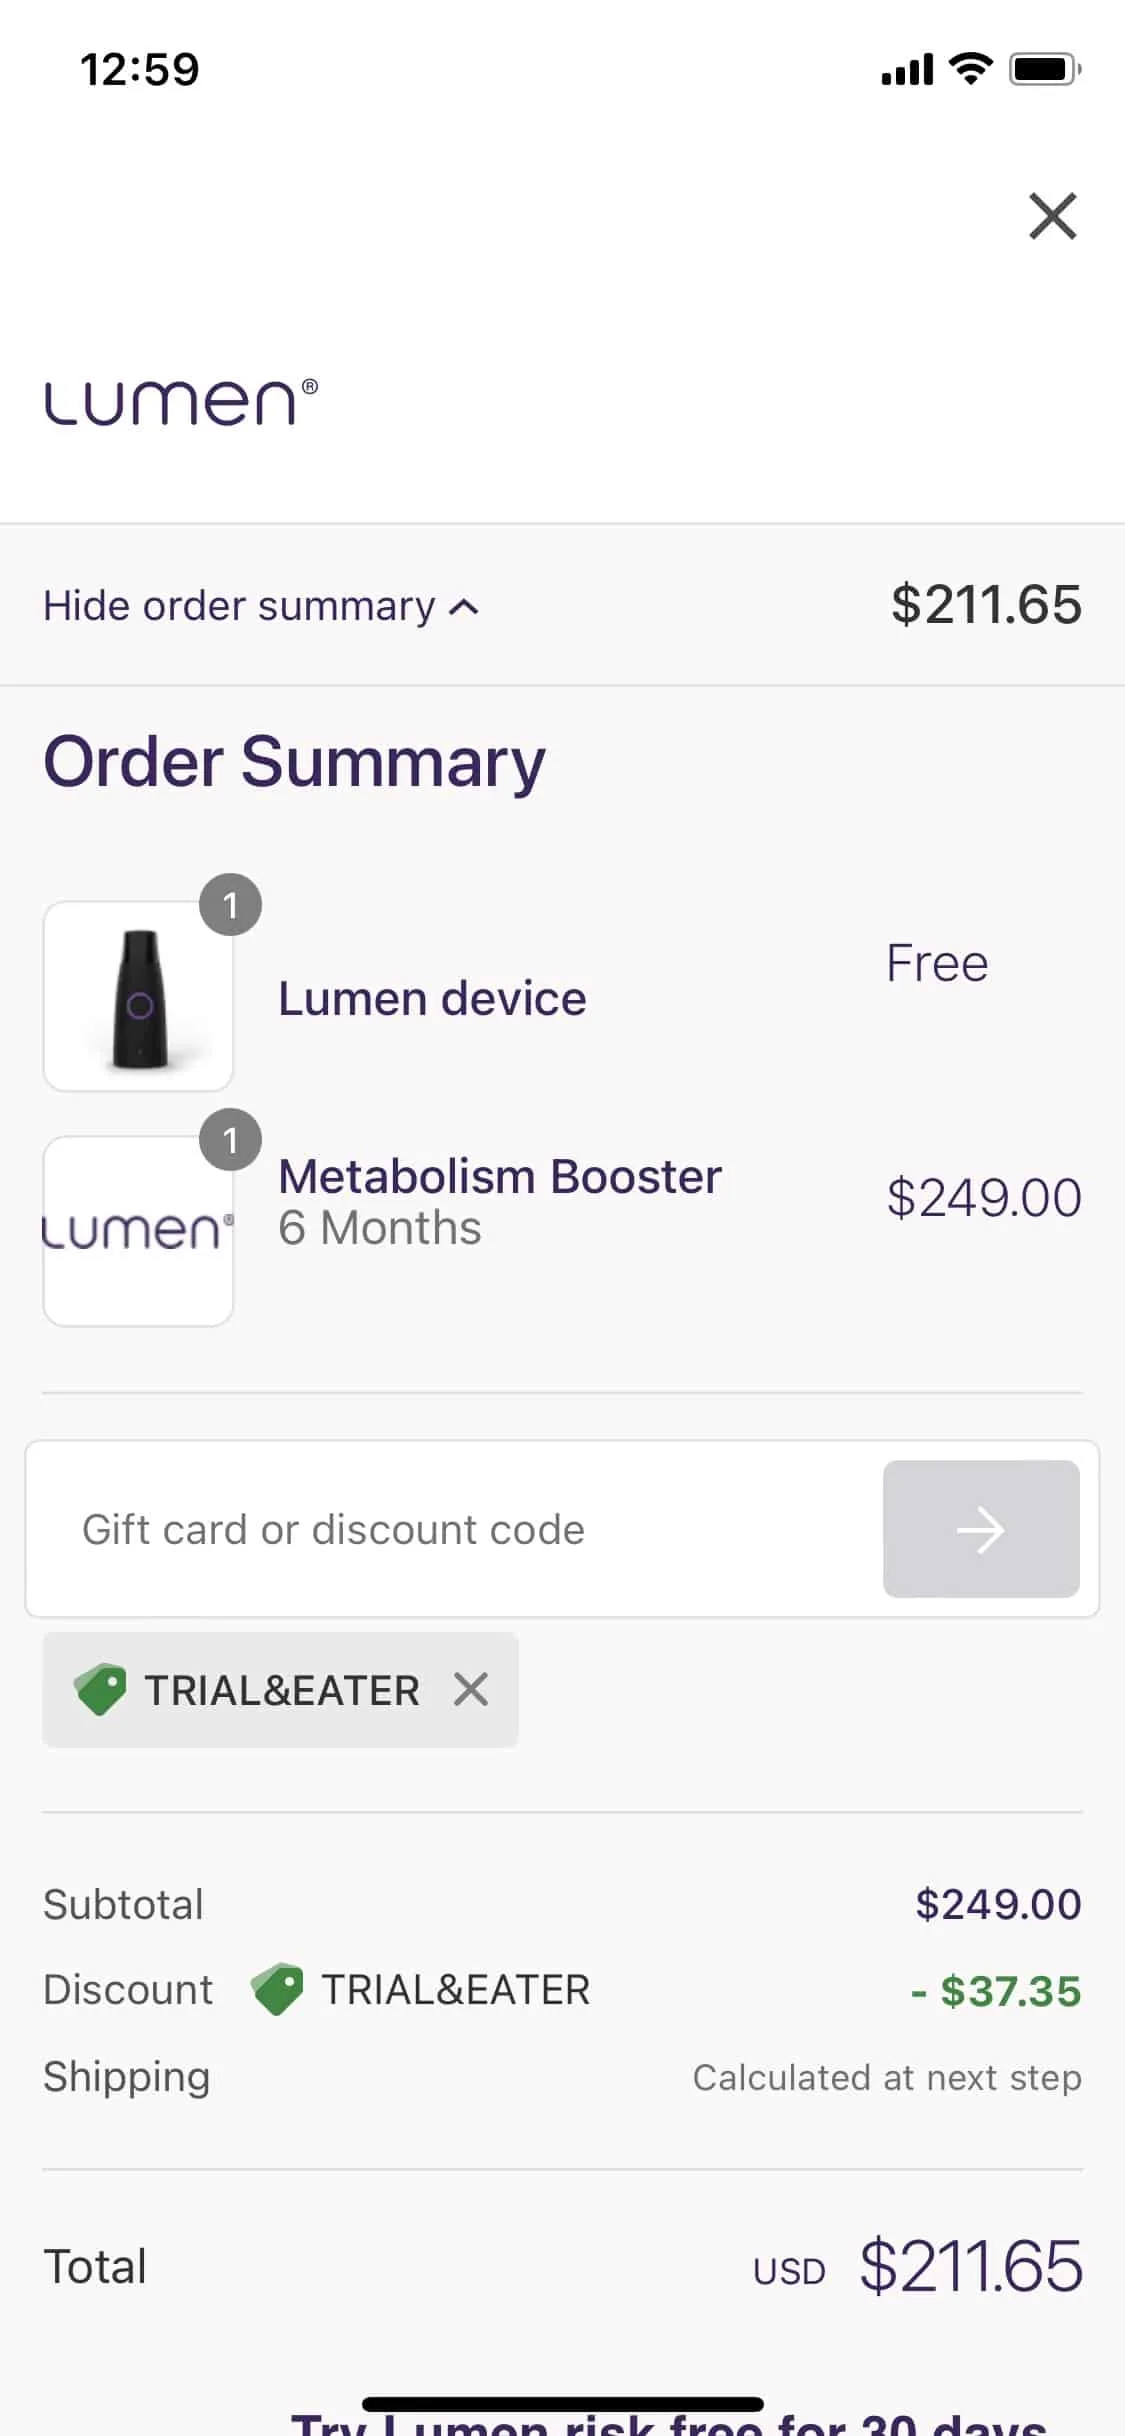 screenshot of how to use Trial&Eater coupon code for Lumen device 6 month